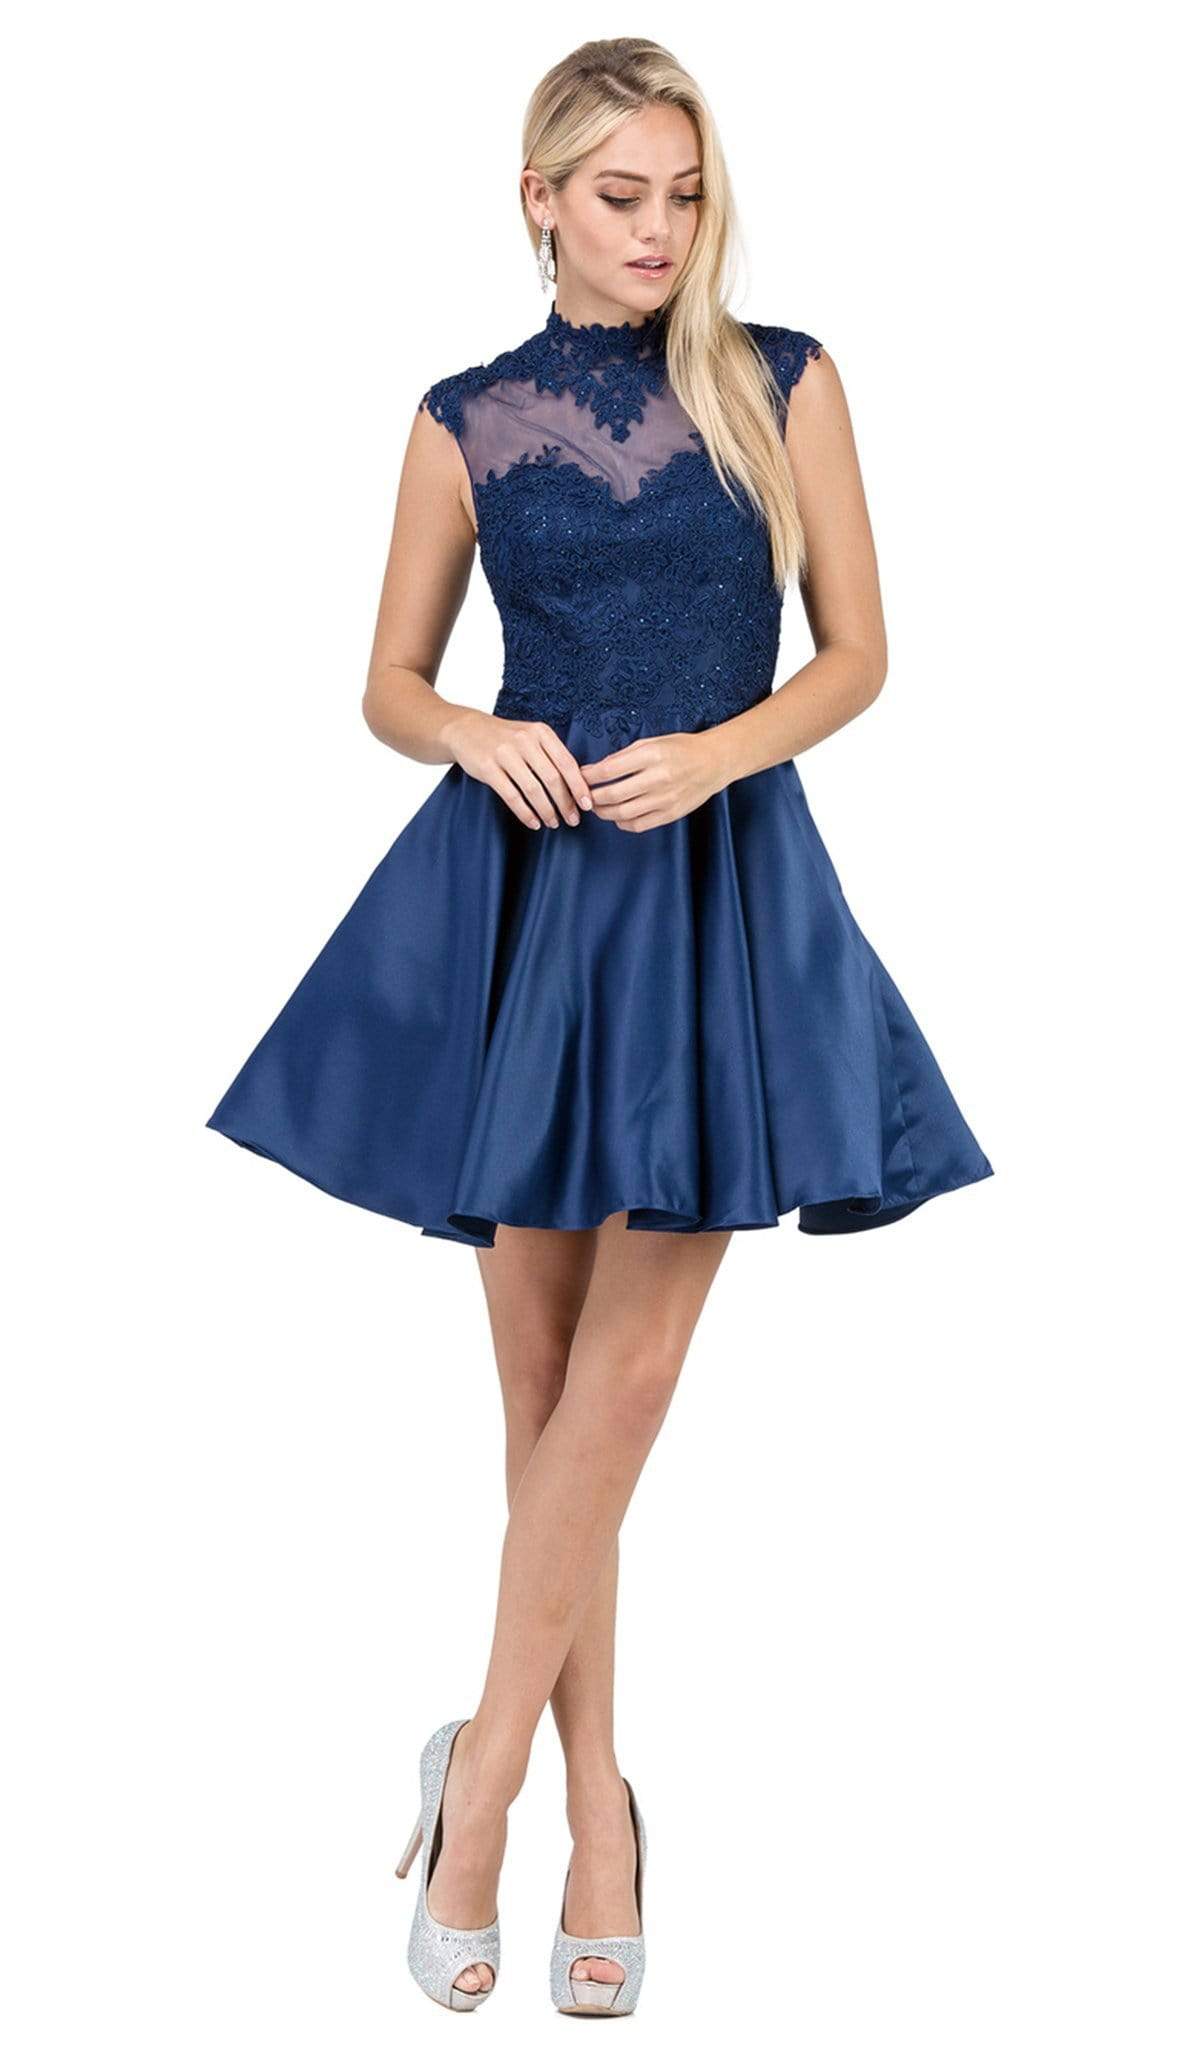 Dancing Queen - 3069 Appliqued Illusion High Neck Homecoming Dress Homecoming Dresses XS / Navy